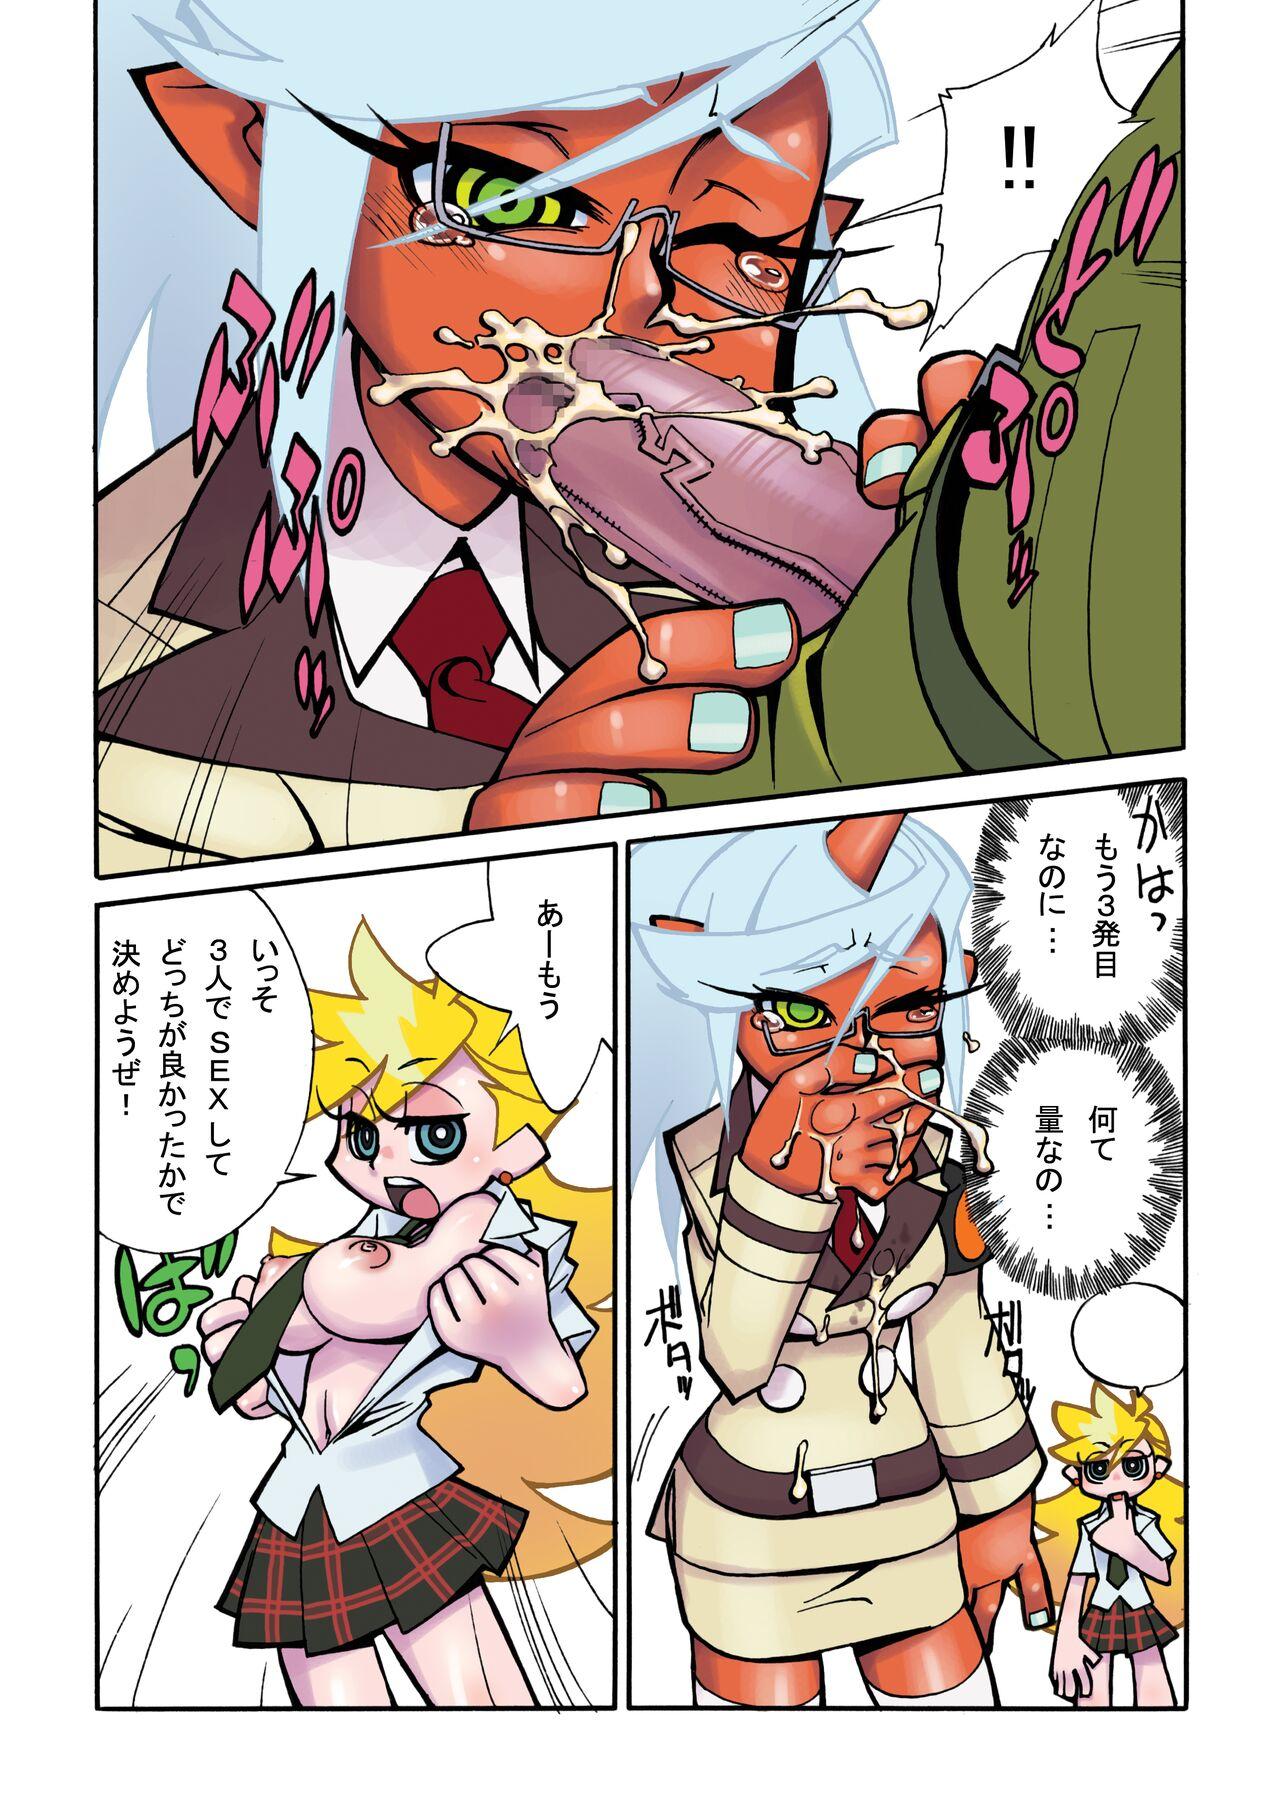 Piercing PT&NS - Panty and stocking with garterbelt Latina - Page 8